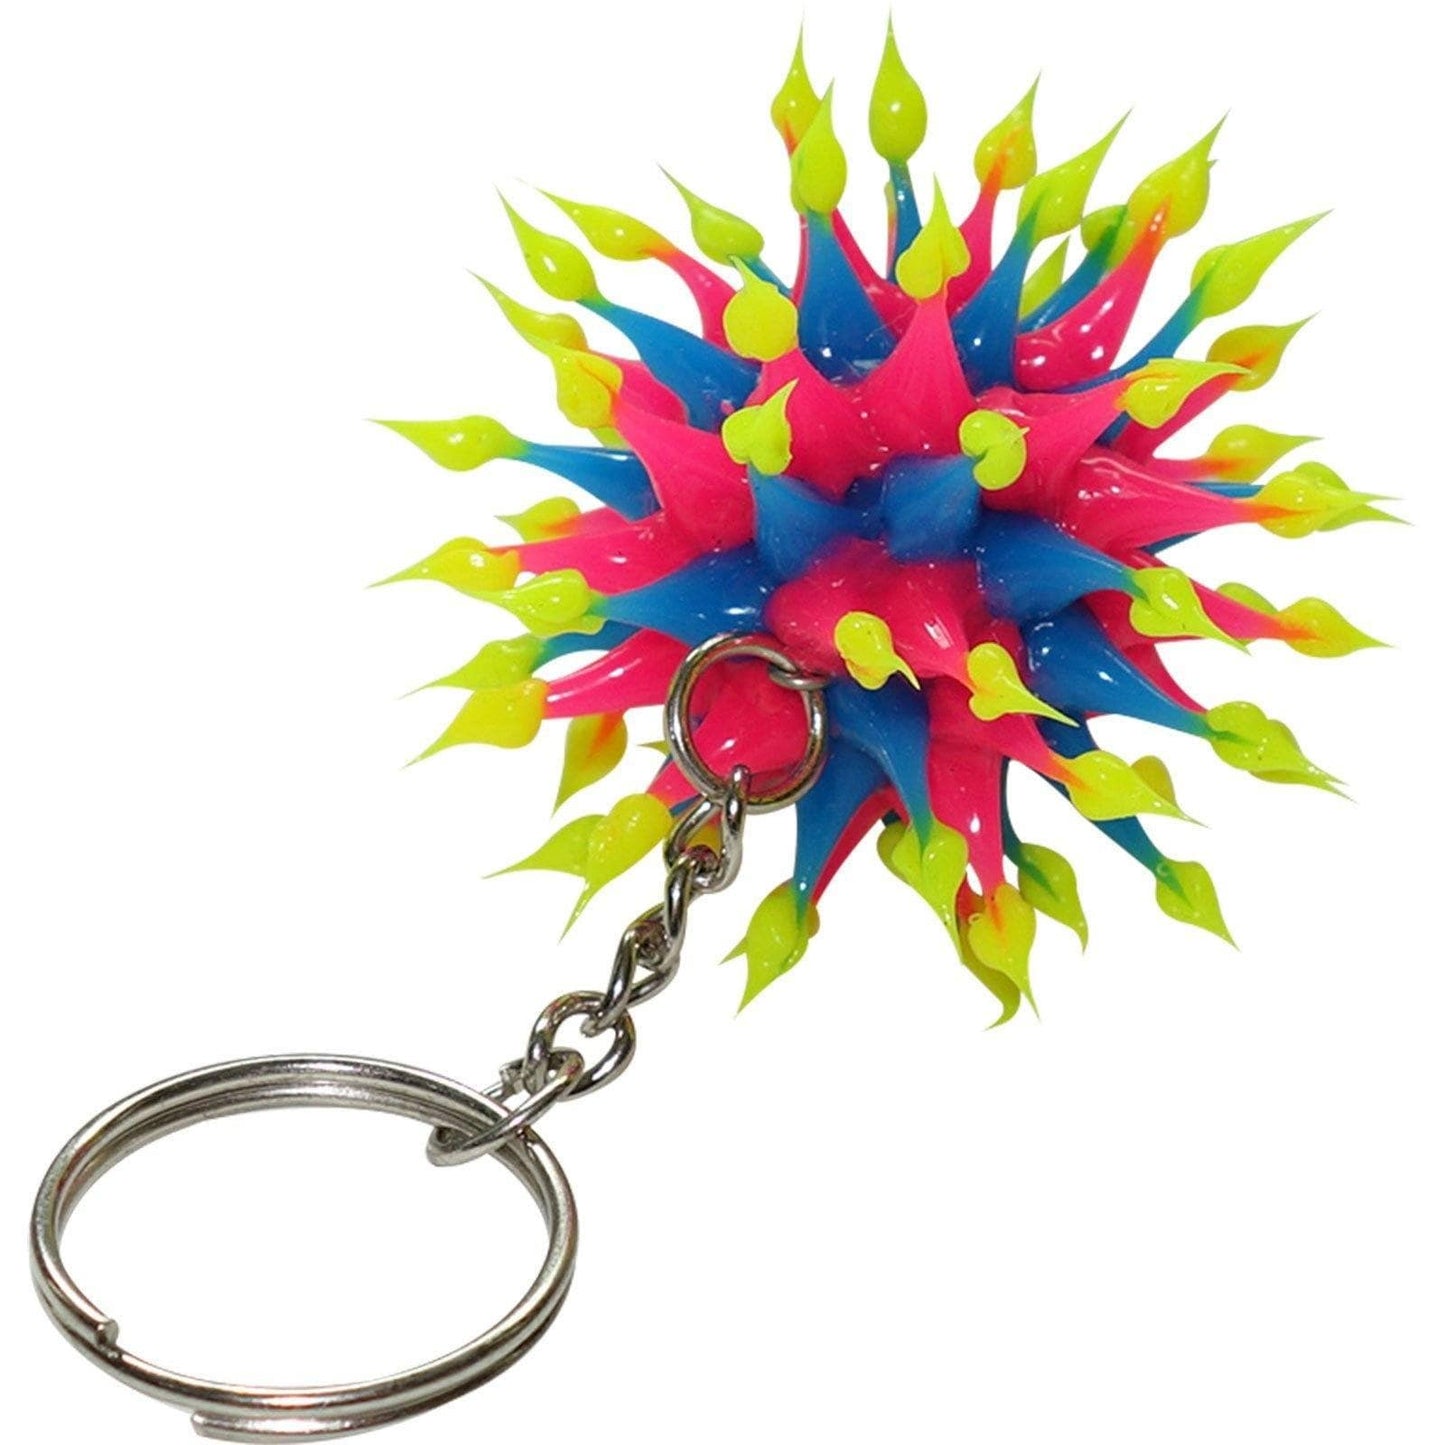 2 X Bright Spiky Ball Keyrings Rubber Silicone Keychains Key Ring Chains Toys